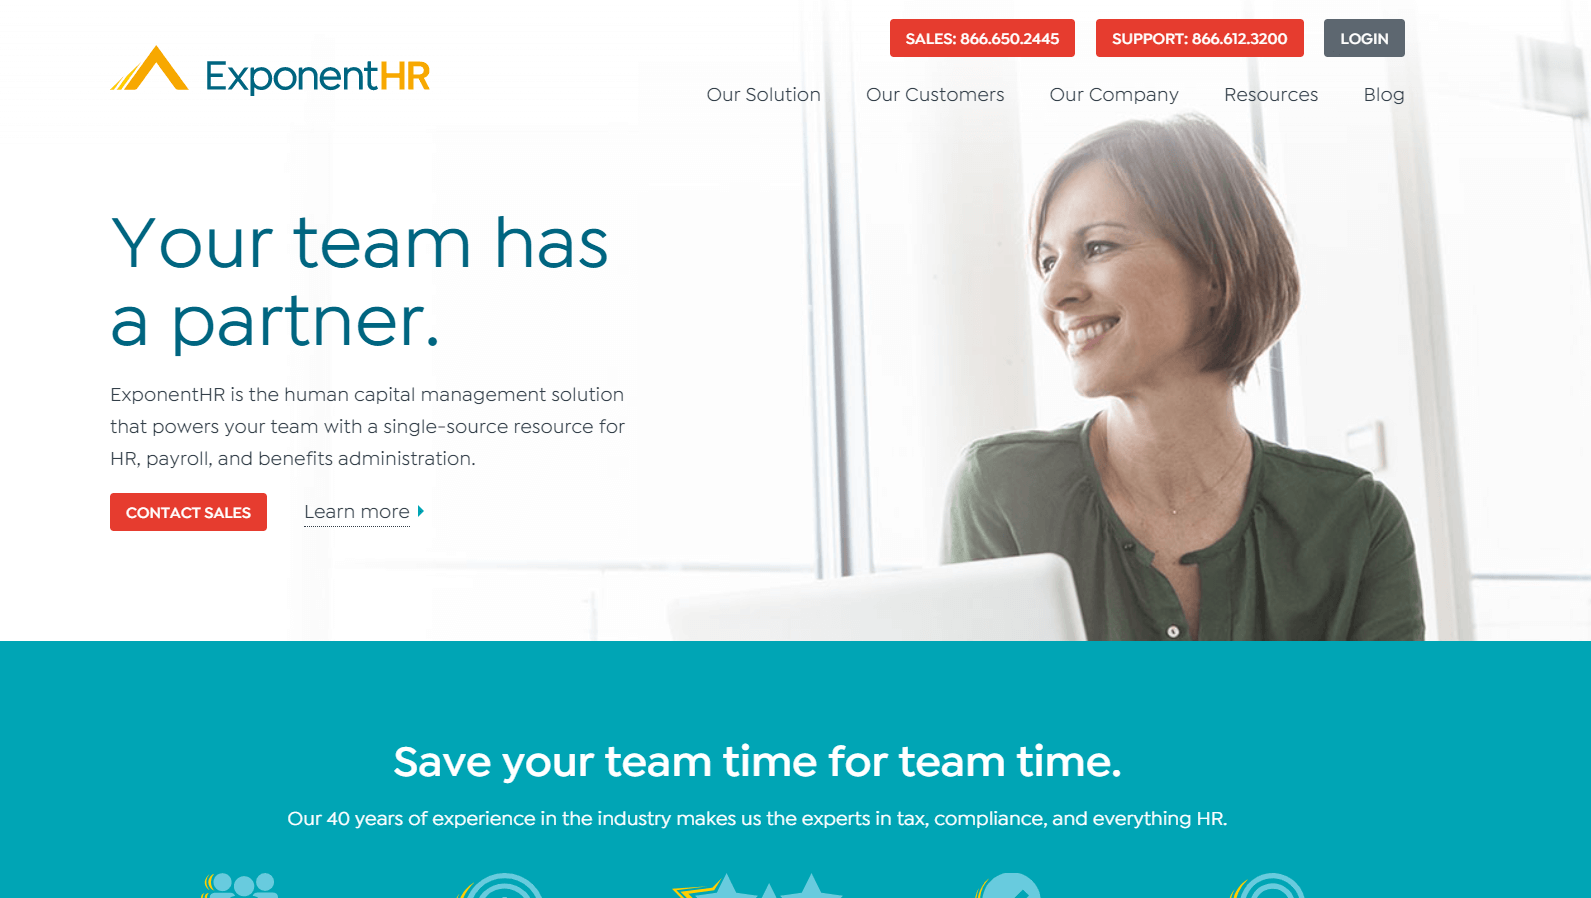 Exponenthr Review | One of the Best HR Company